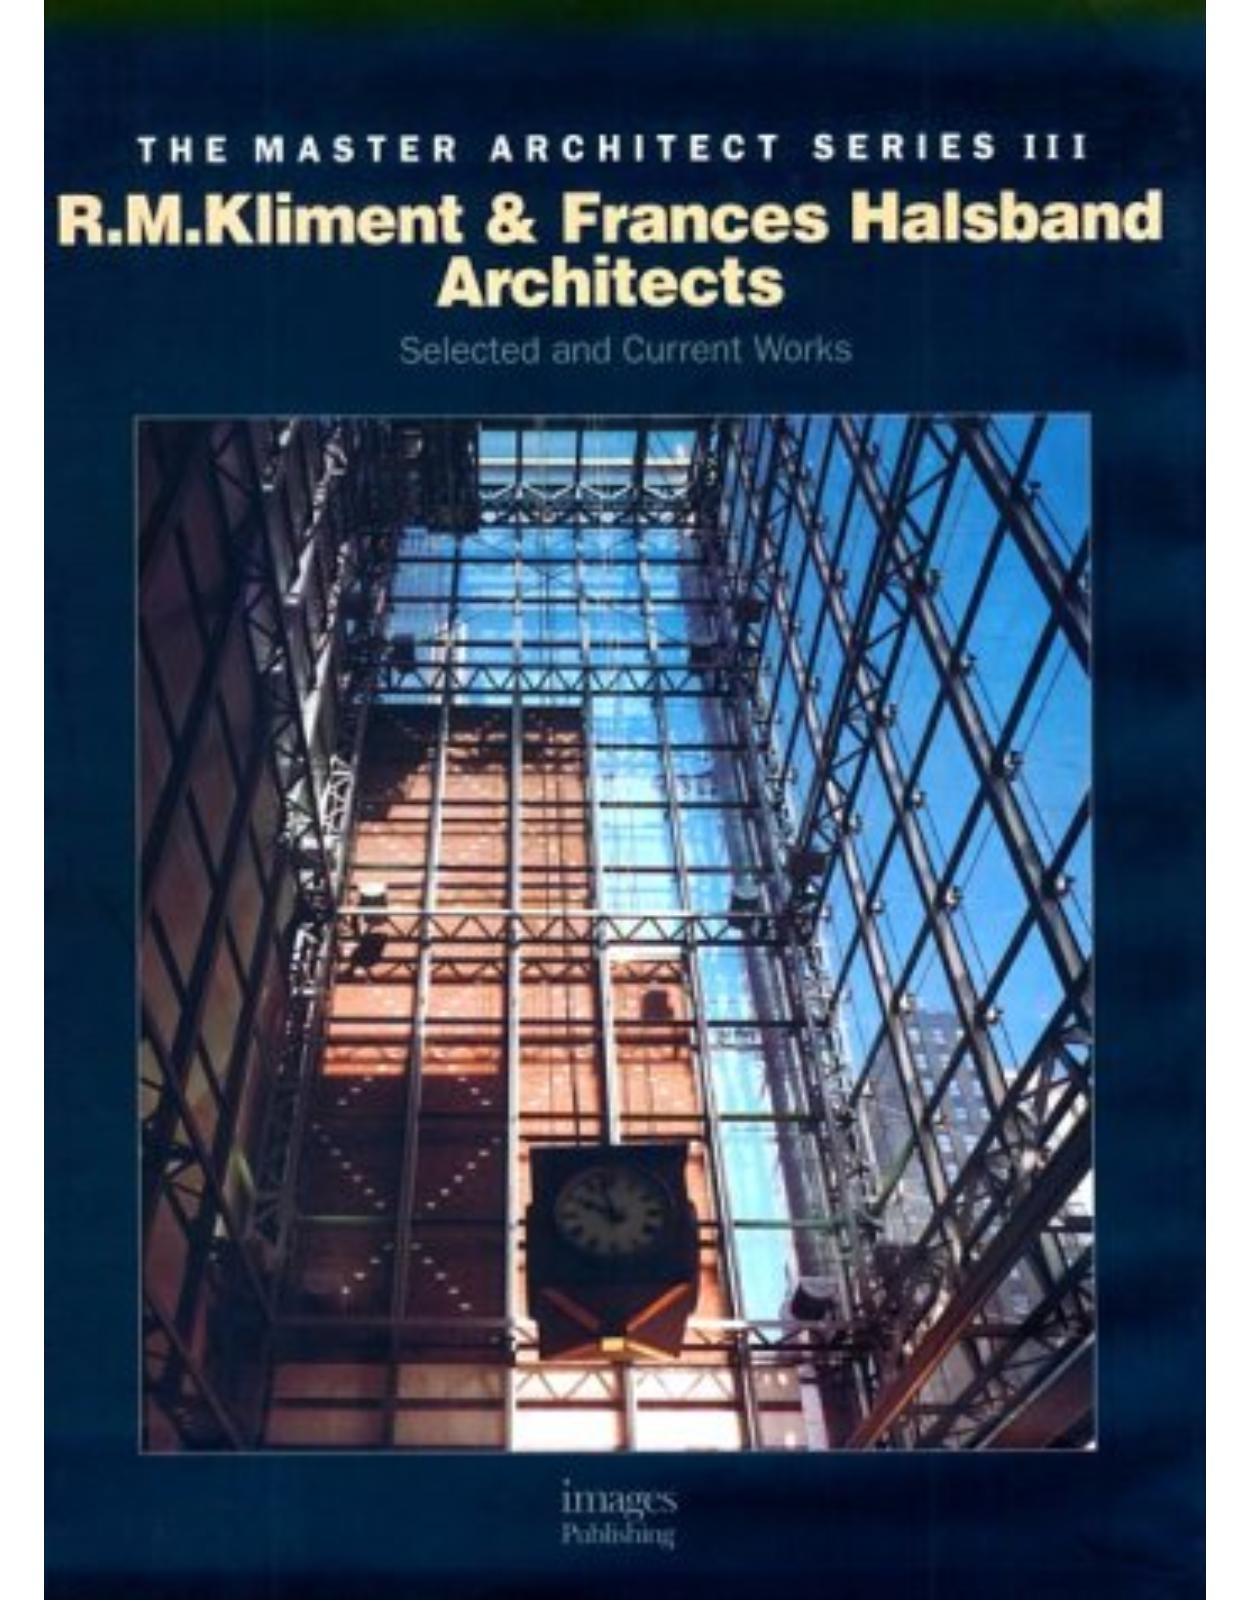 R.M. Kliment and Frances Halsband Architects: Selected and Currrent Works (Master Architect Series III)